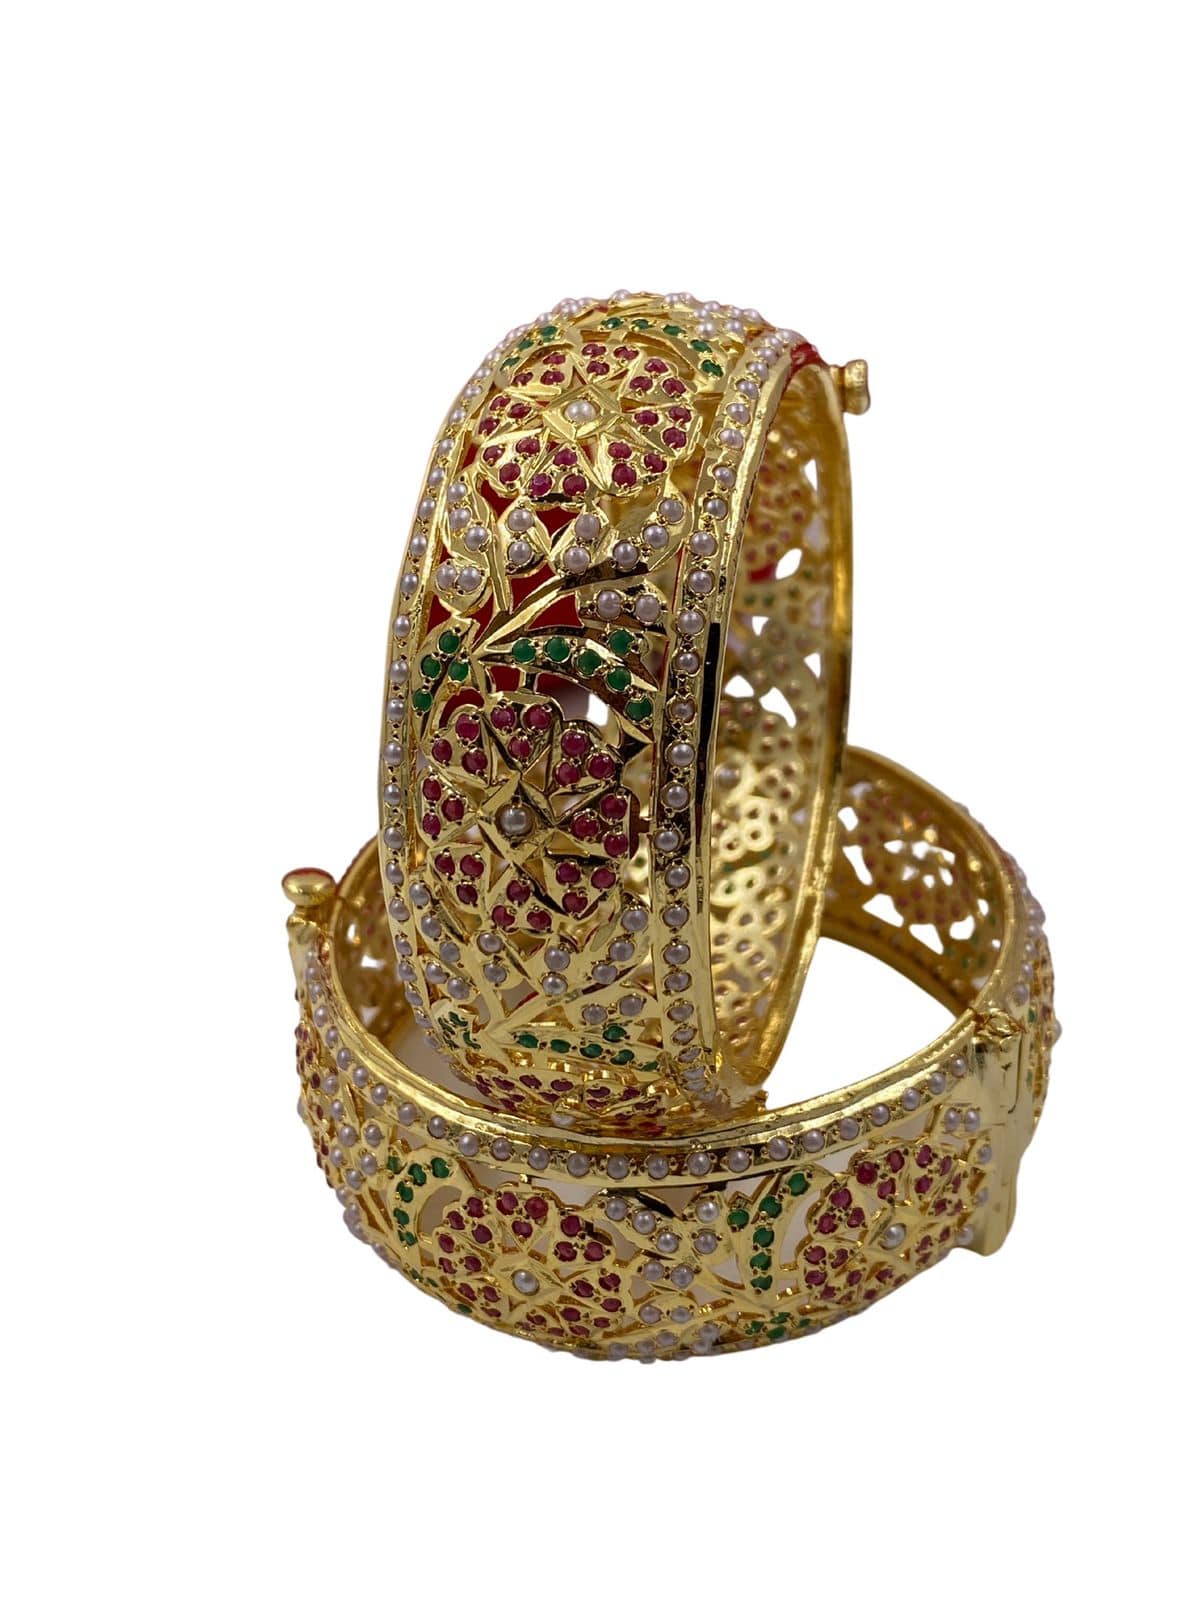 Gold Plated Multi Color Jadau Bangle Set Handcrafted With Real Stones Antique Golden Bangles